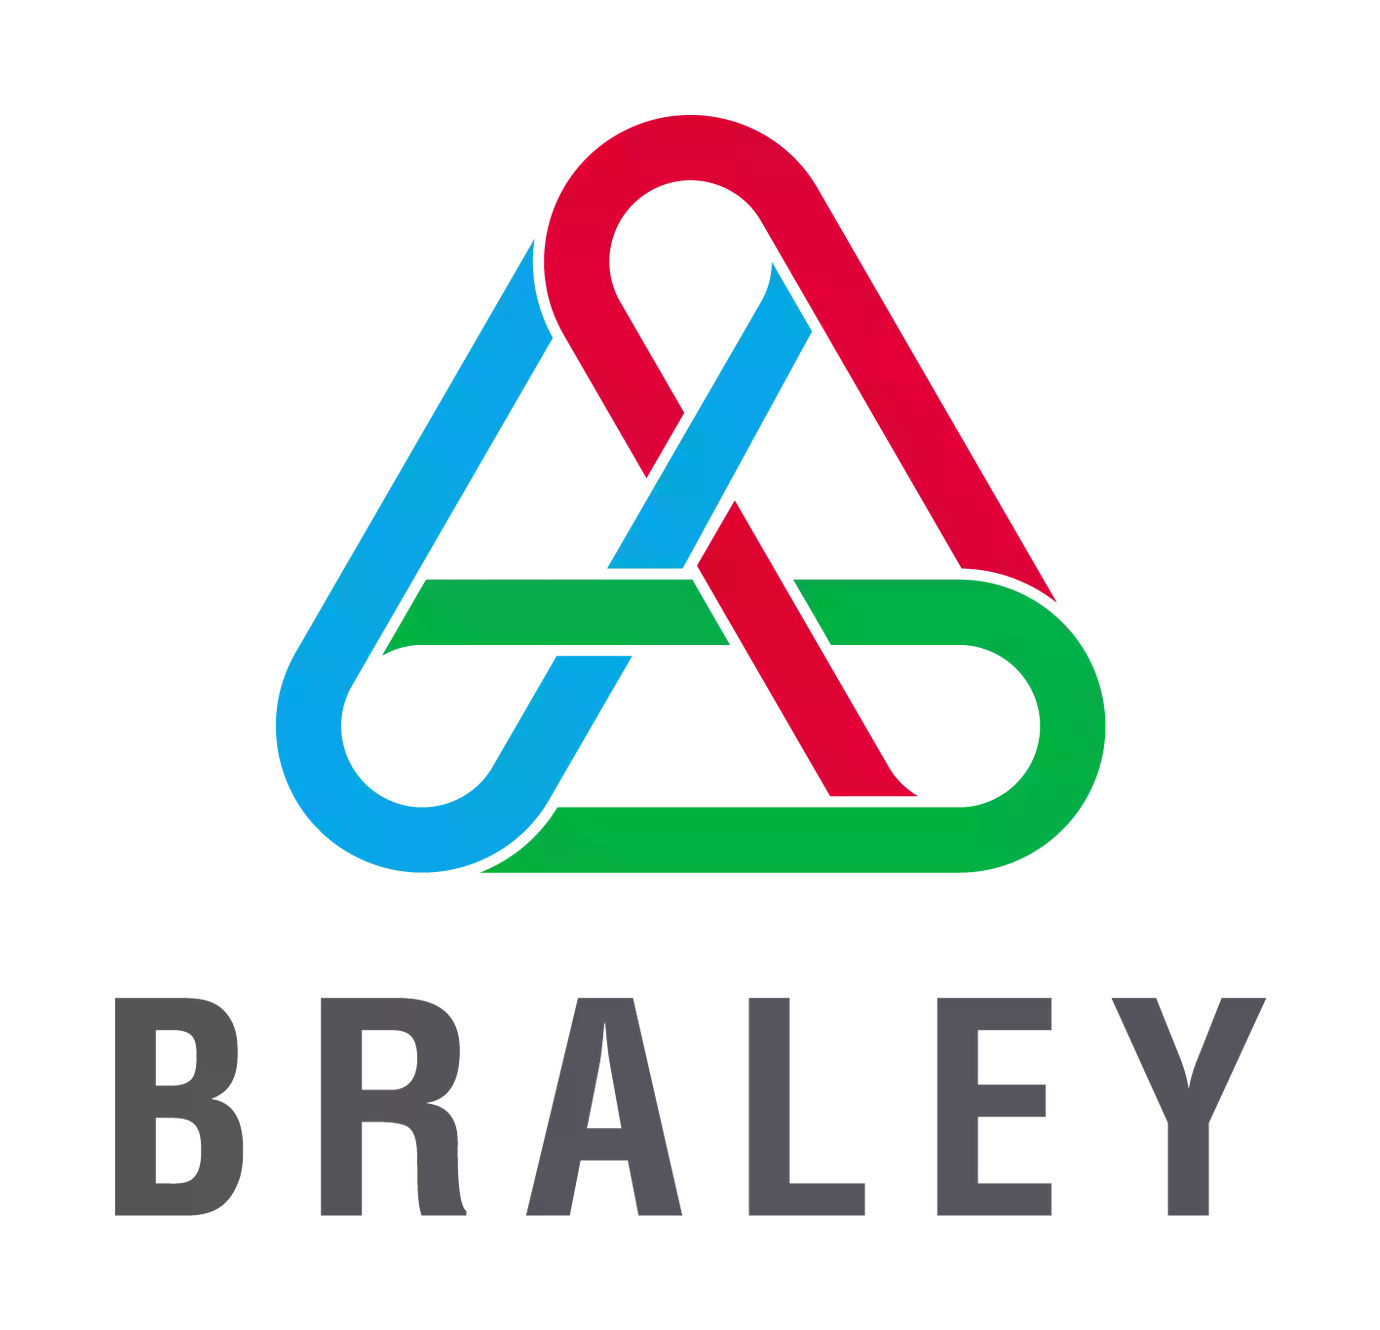 Braley Business Systems